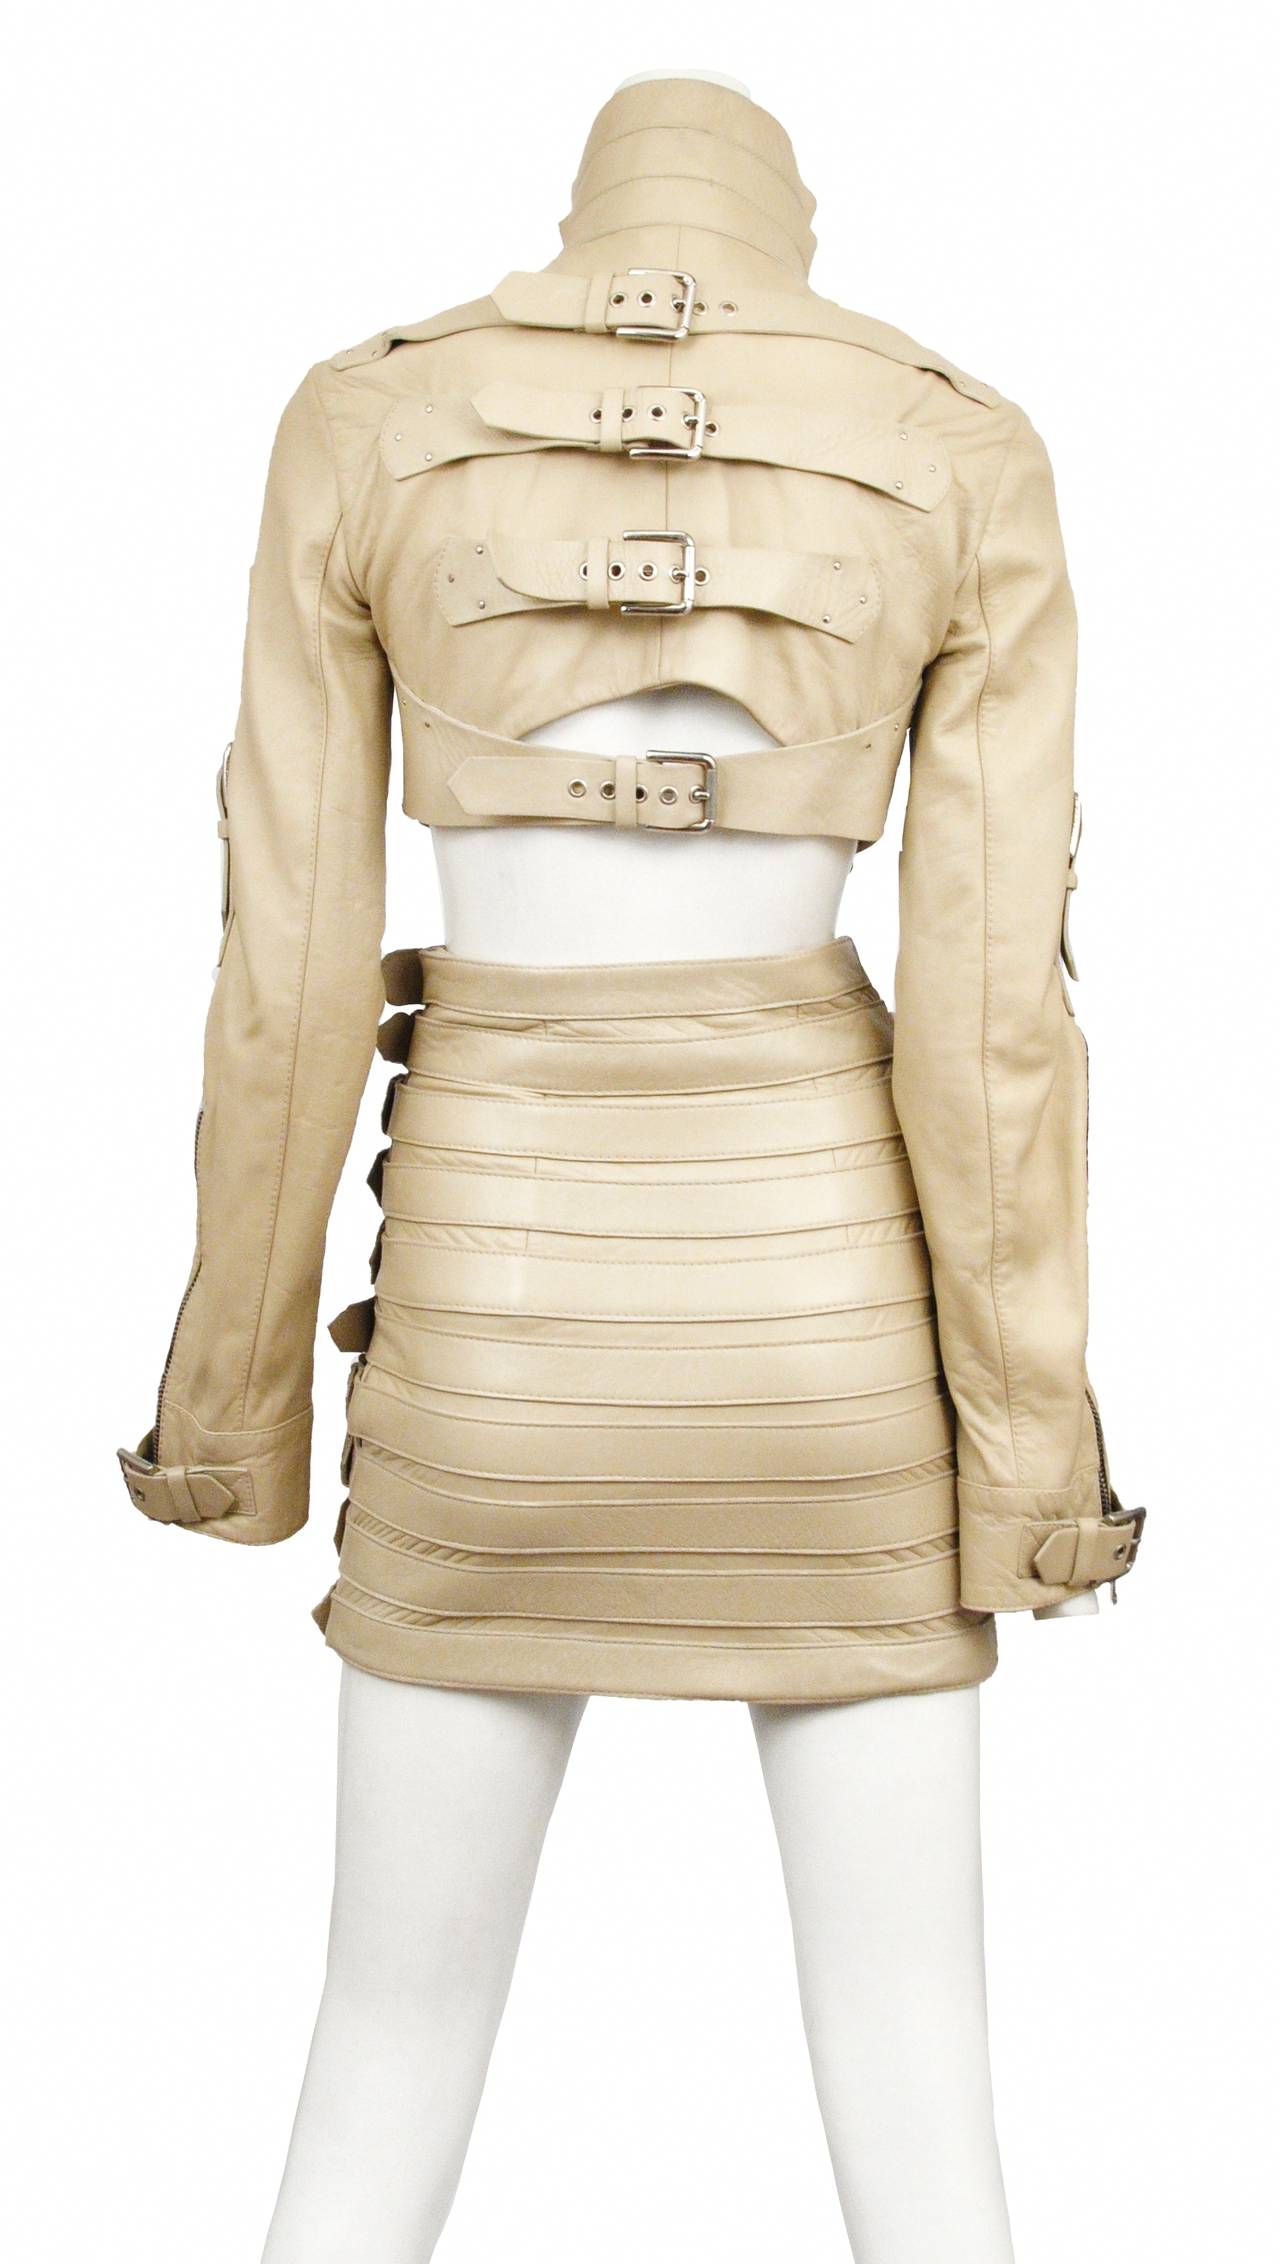 Vintage Dolce and Gabbana light tan leather bondage buckle jacket paired with matching high waisted skirt.